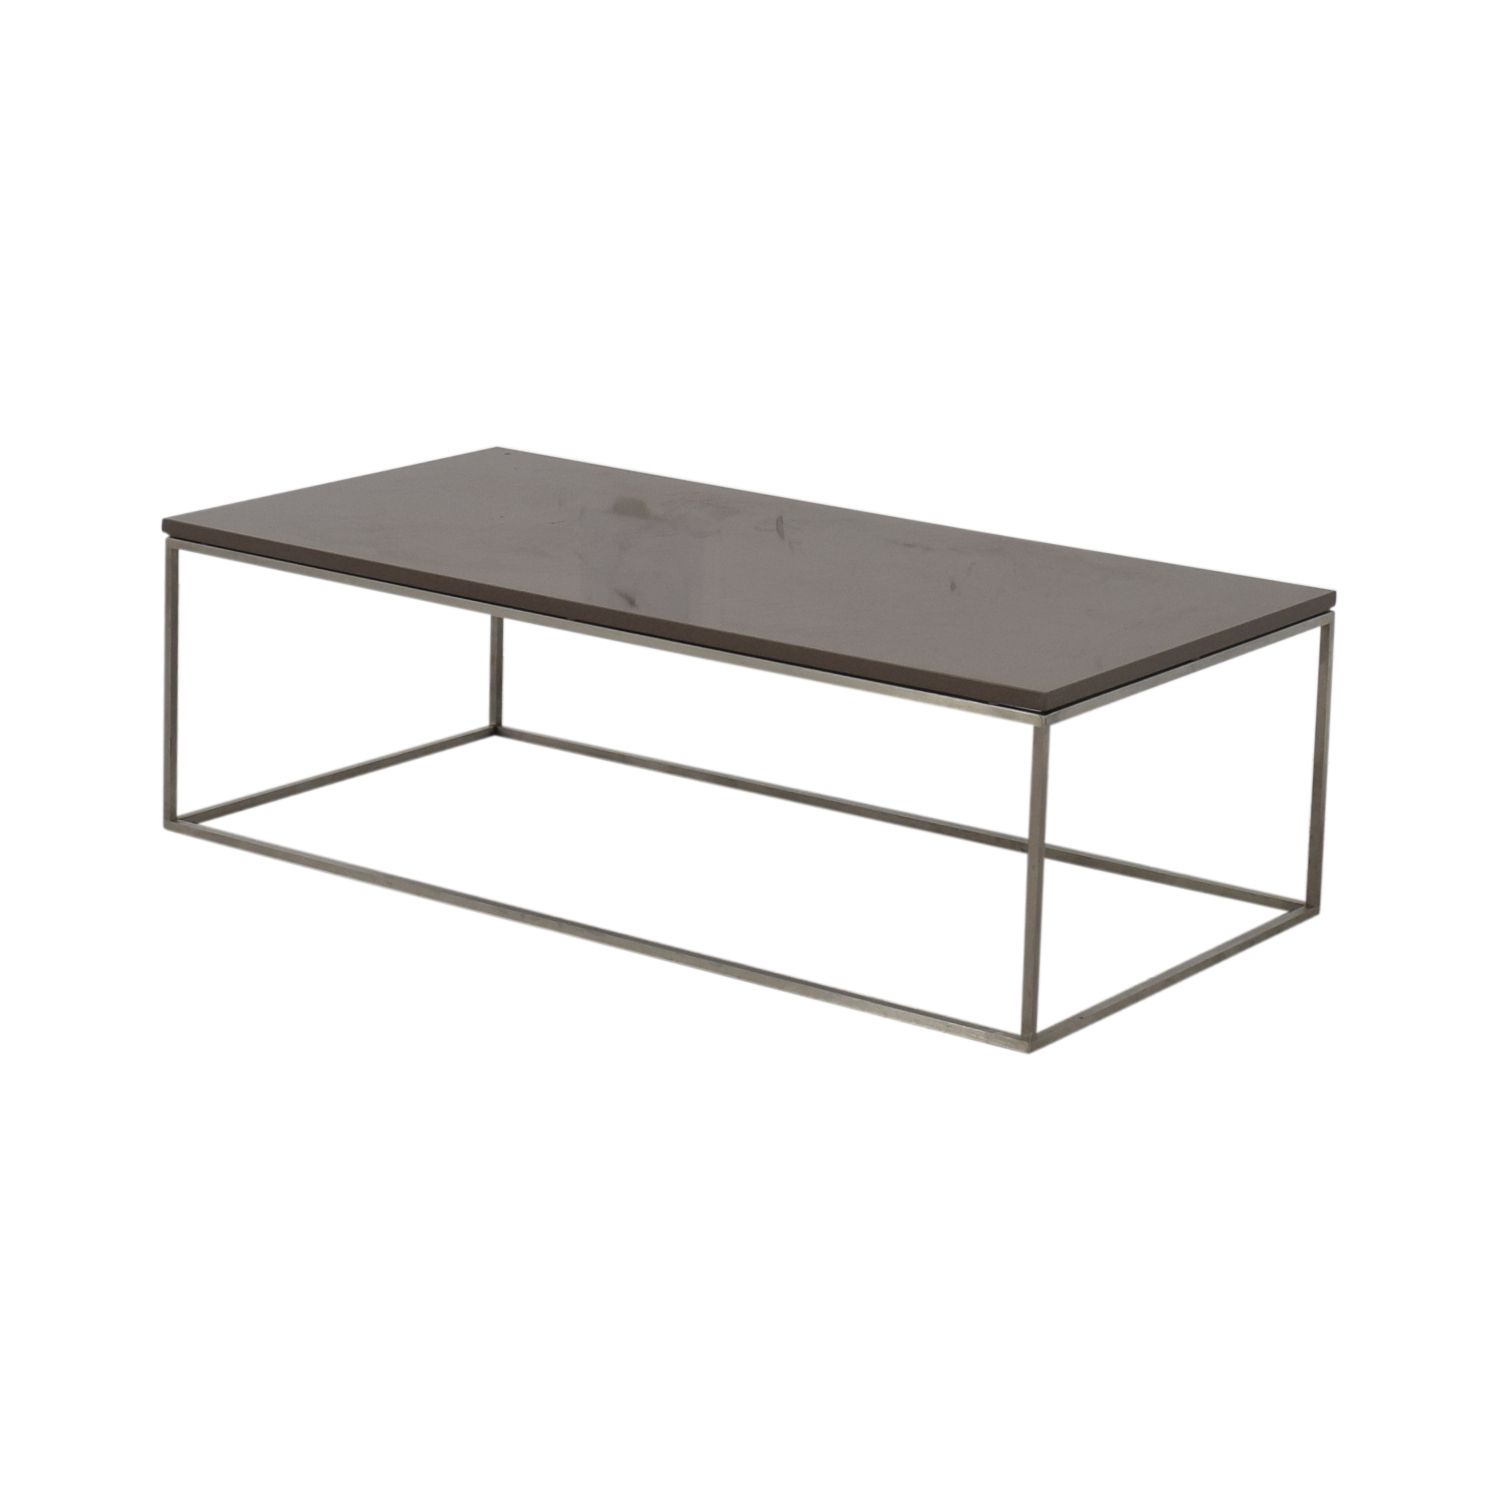 [%well Known Strata Chrome Glass Coffee Tables Regarding 65% Off – Room & Board Room & Board Coffee Table / Tables|65% Off – Room & Board Room & Board Coffee Table / Tables With Regard To Popular Strata Chrome Glass Coffee Tables%] (View 15 of 20)